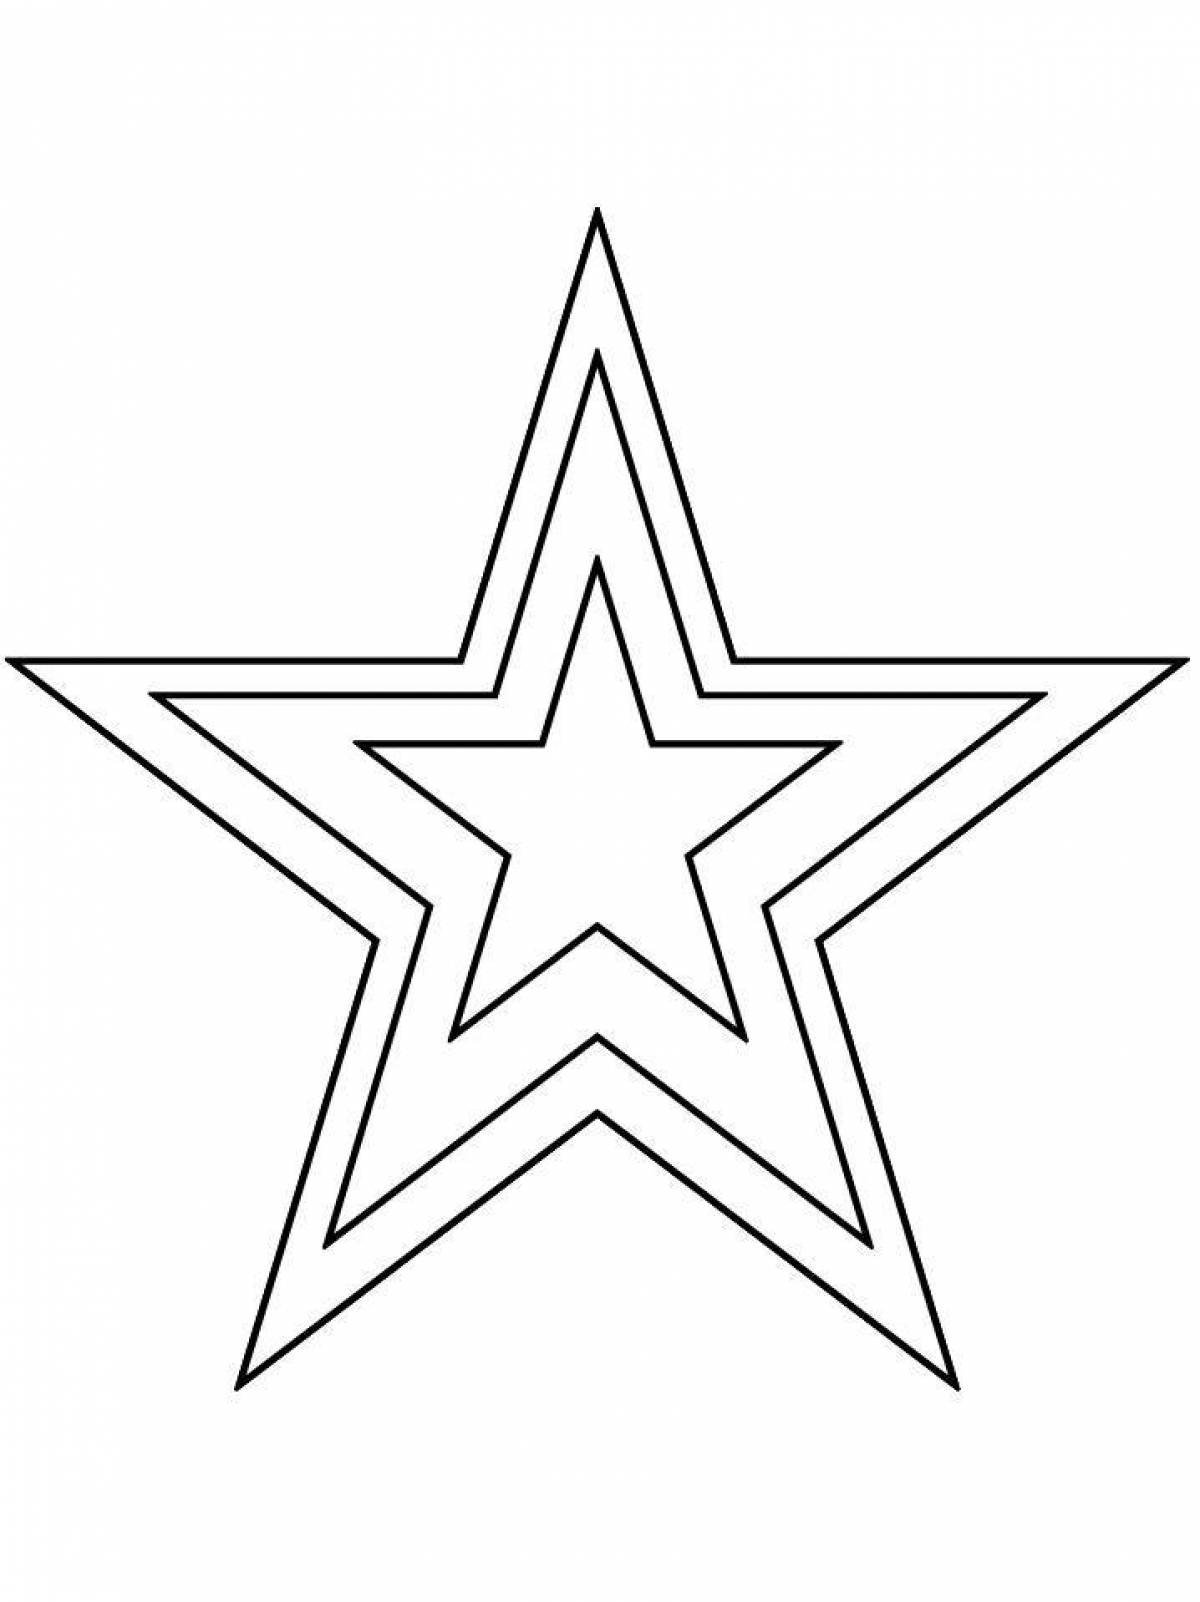 Fine five pointed star coloring book